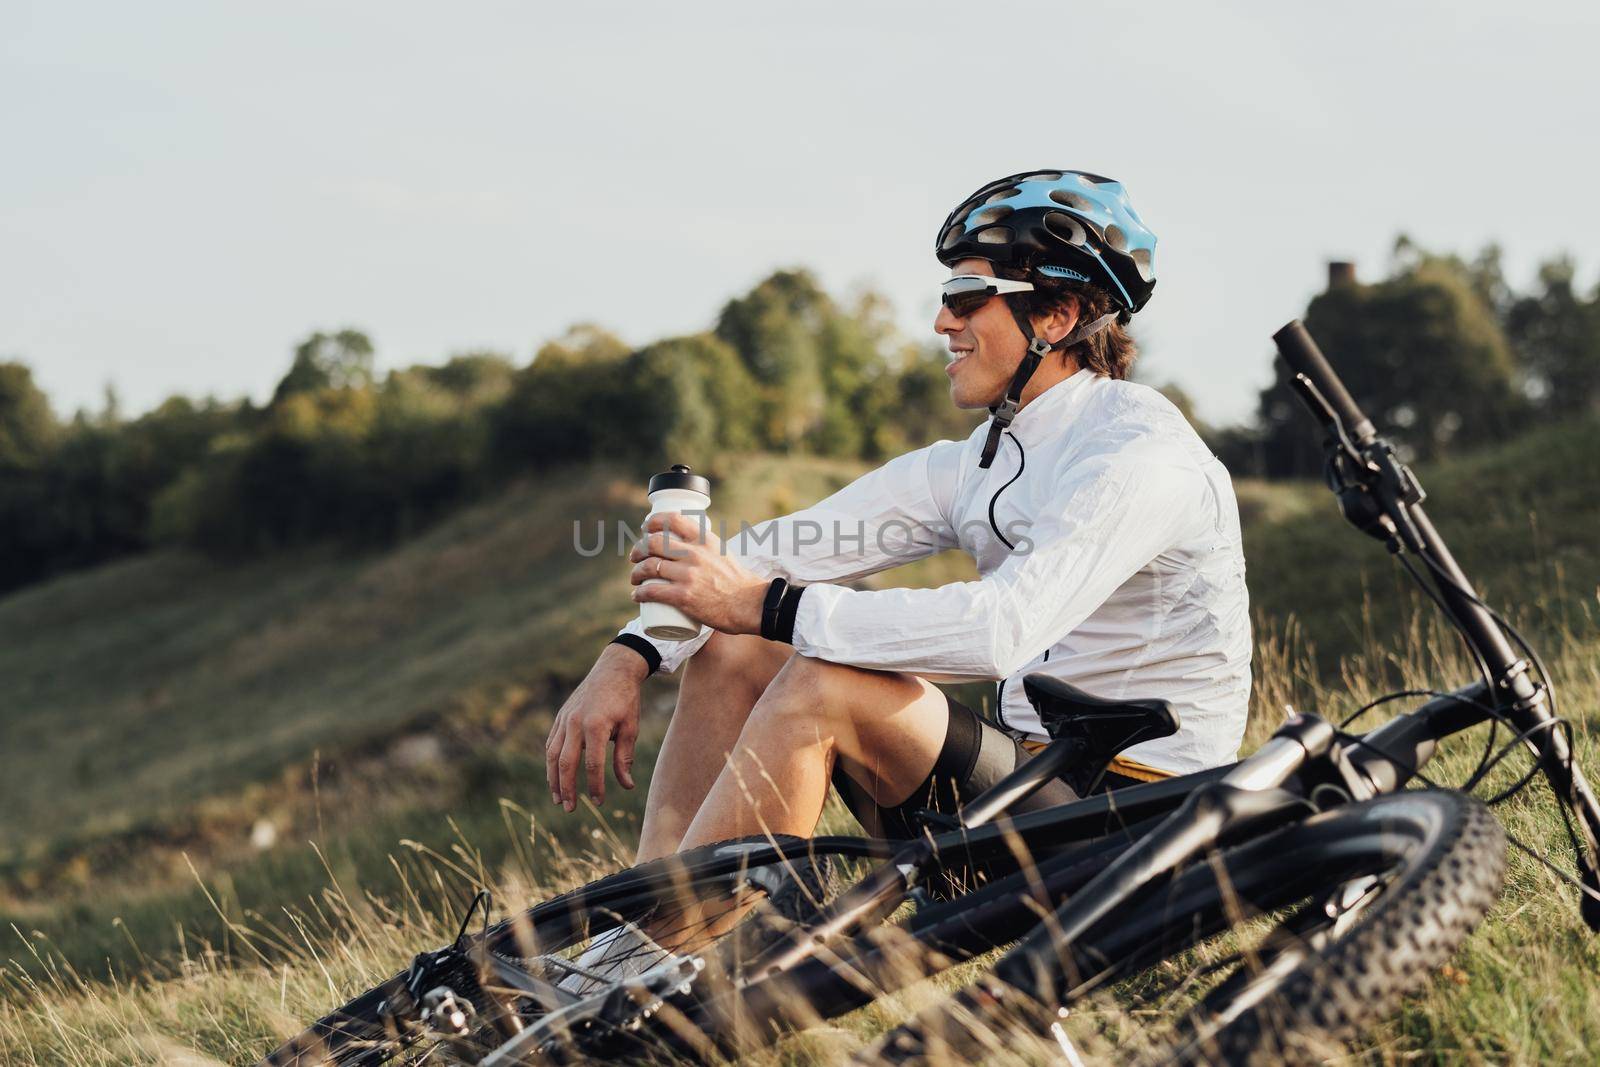 Professional Male Cyclist Drinking Water from Bottle, Man Sitting Near His Bicycle During His Journey Outdoors in Countryside by Romvy